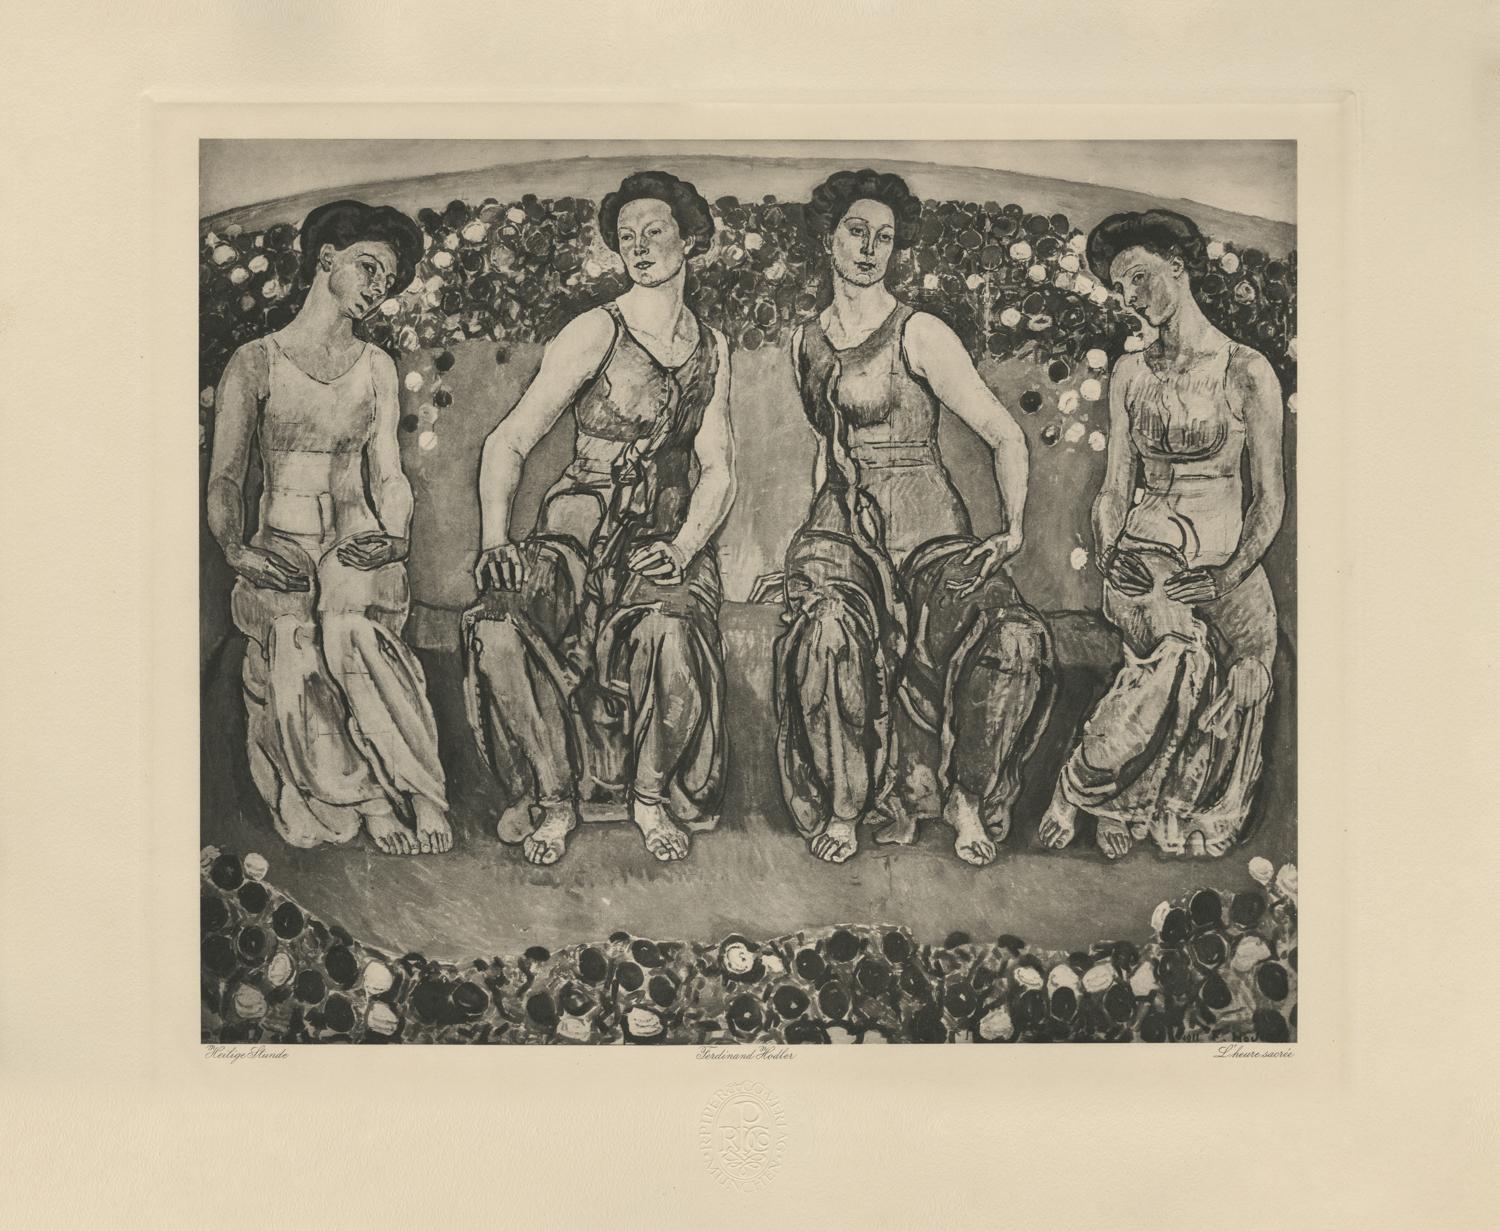 Ferdinand Hodler & R. Piper & Co. Figurative Print - "The Holy Hour with Four Figures" Copper Plate Heliogravure